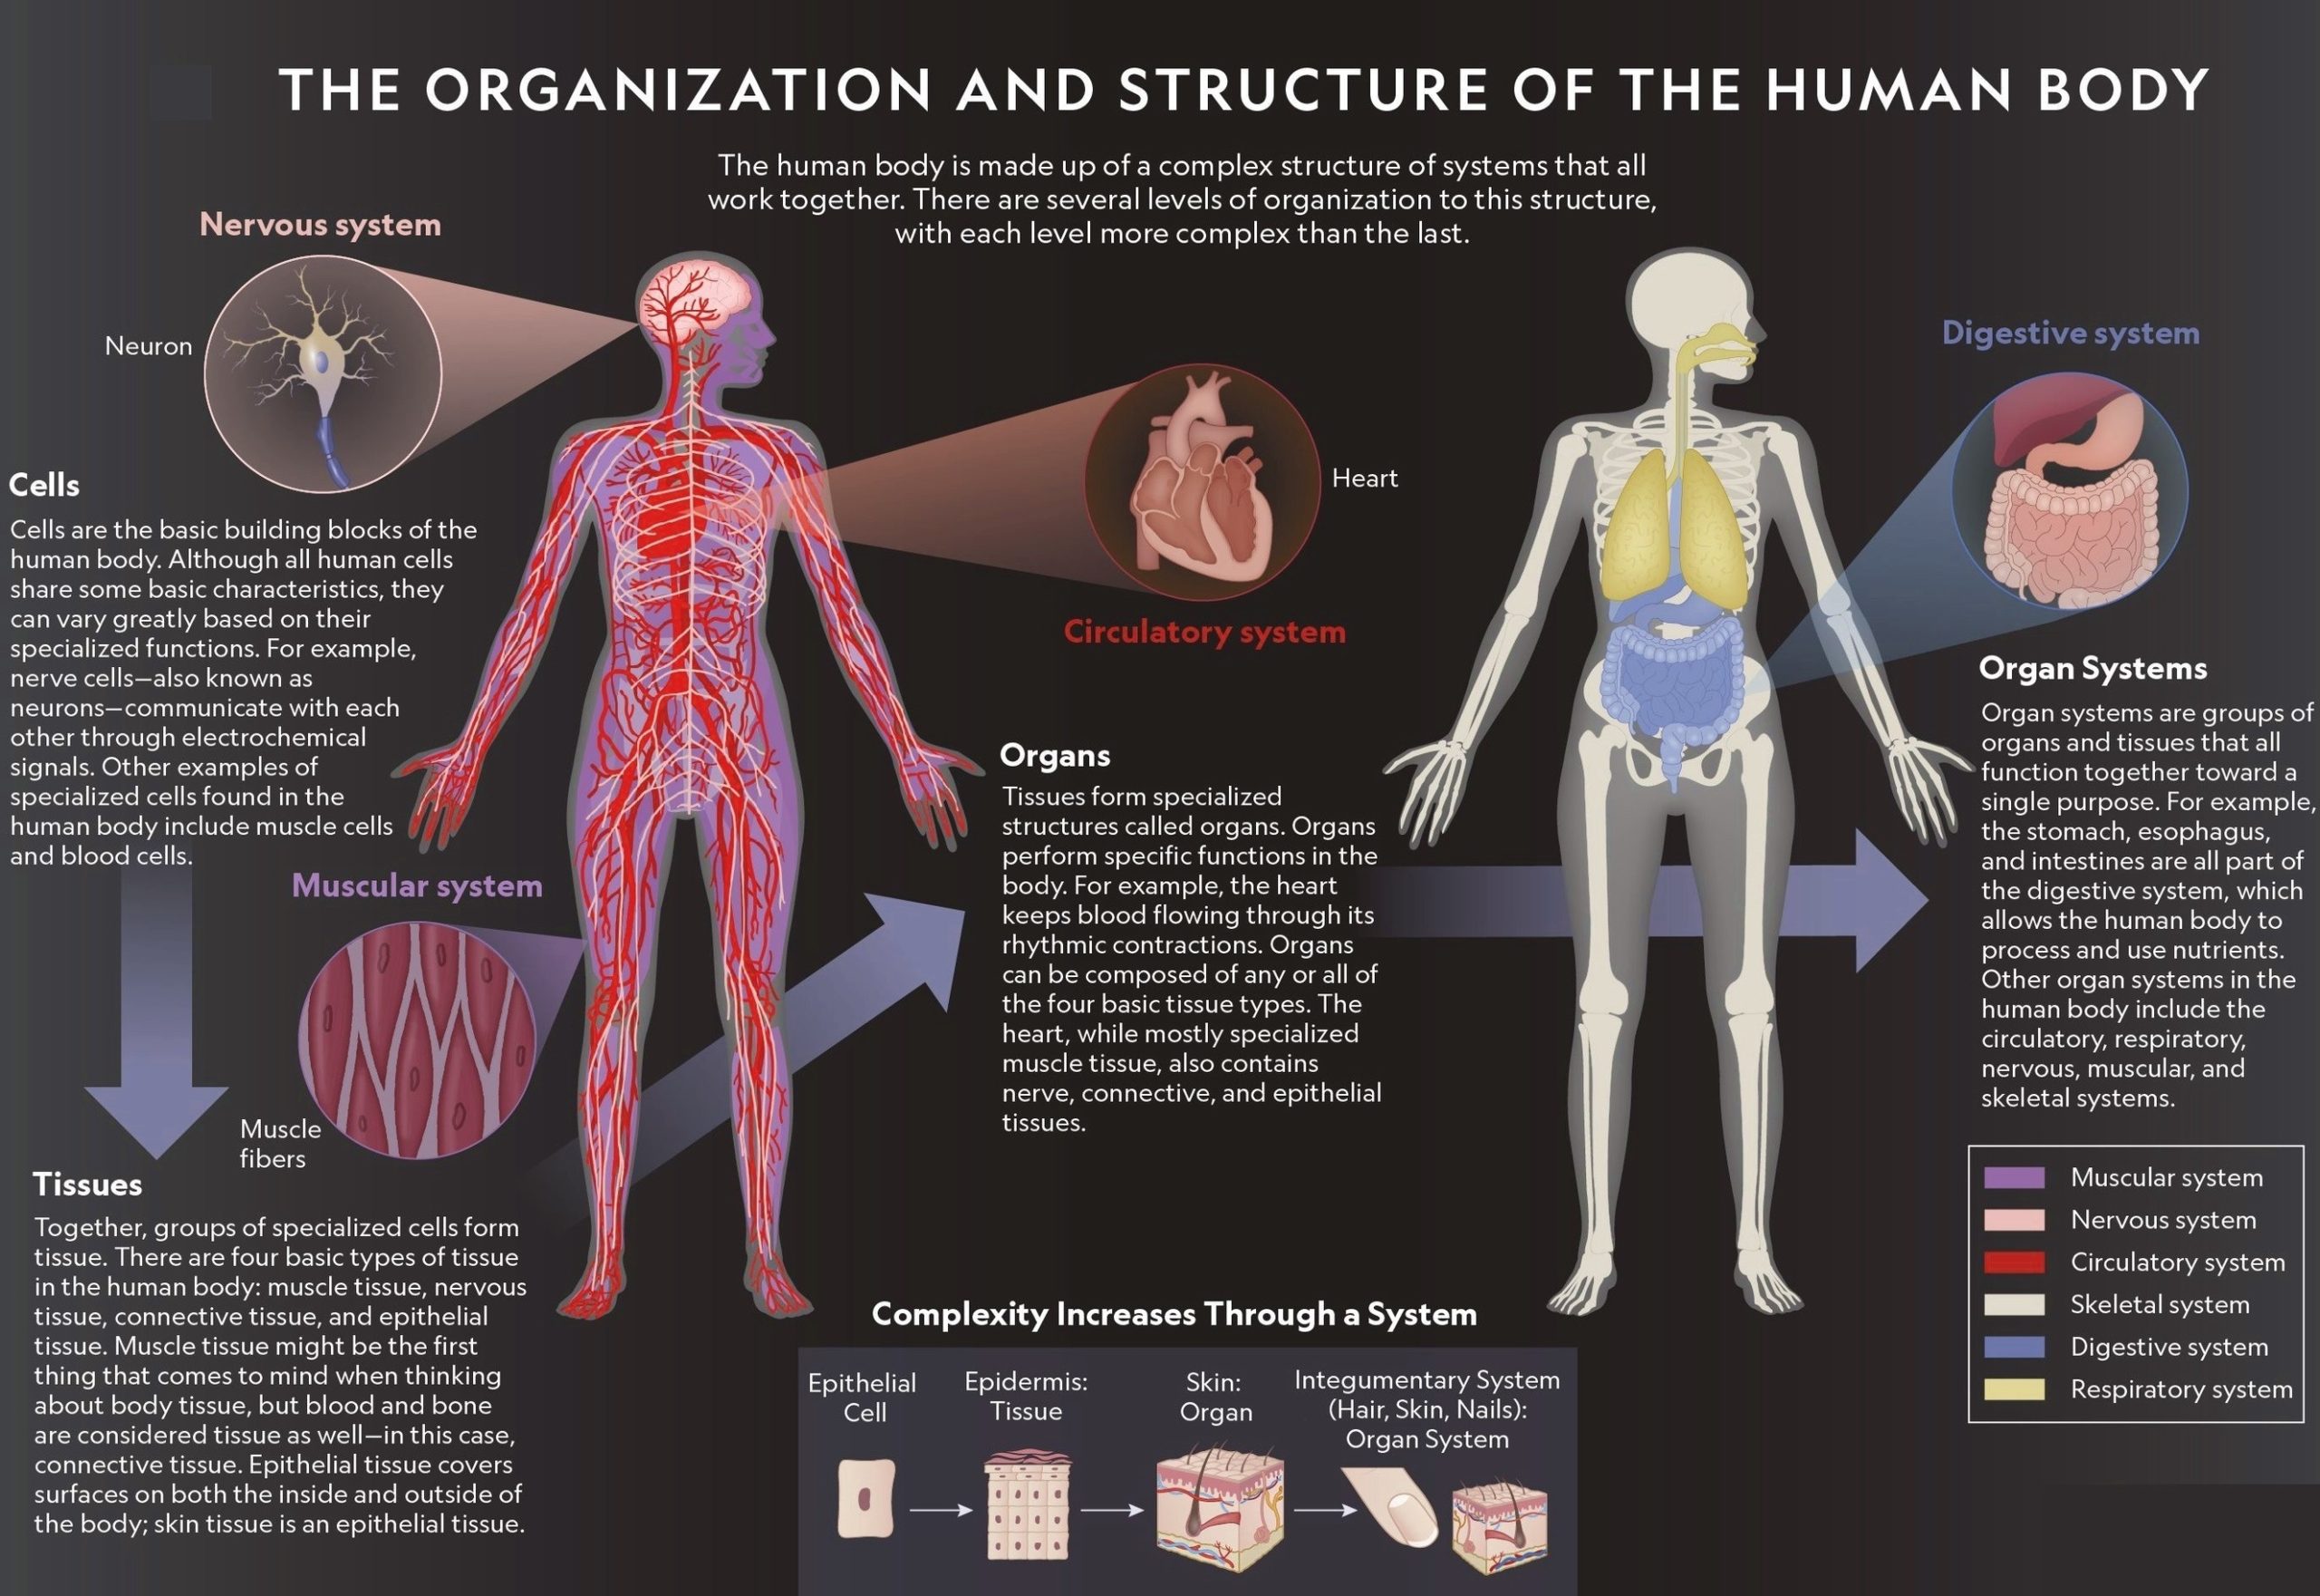 Categories classification and components of human body scaled